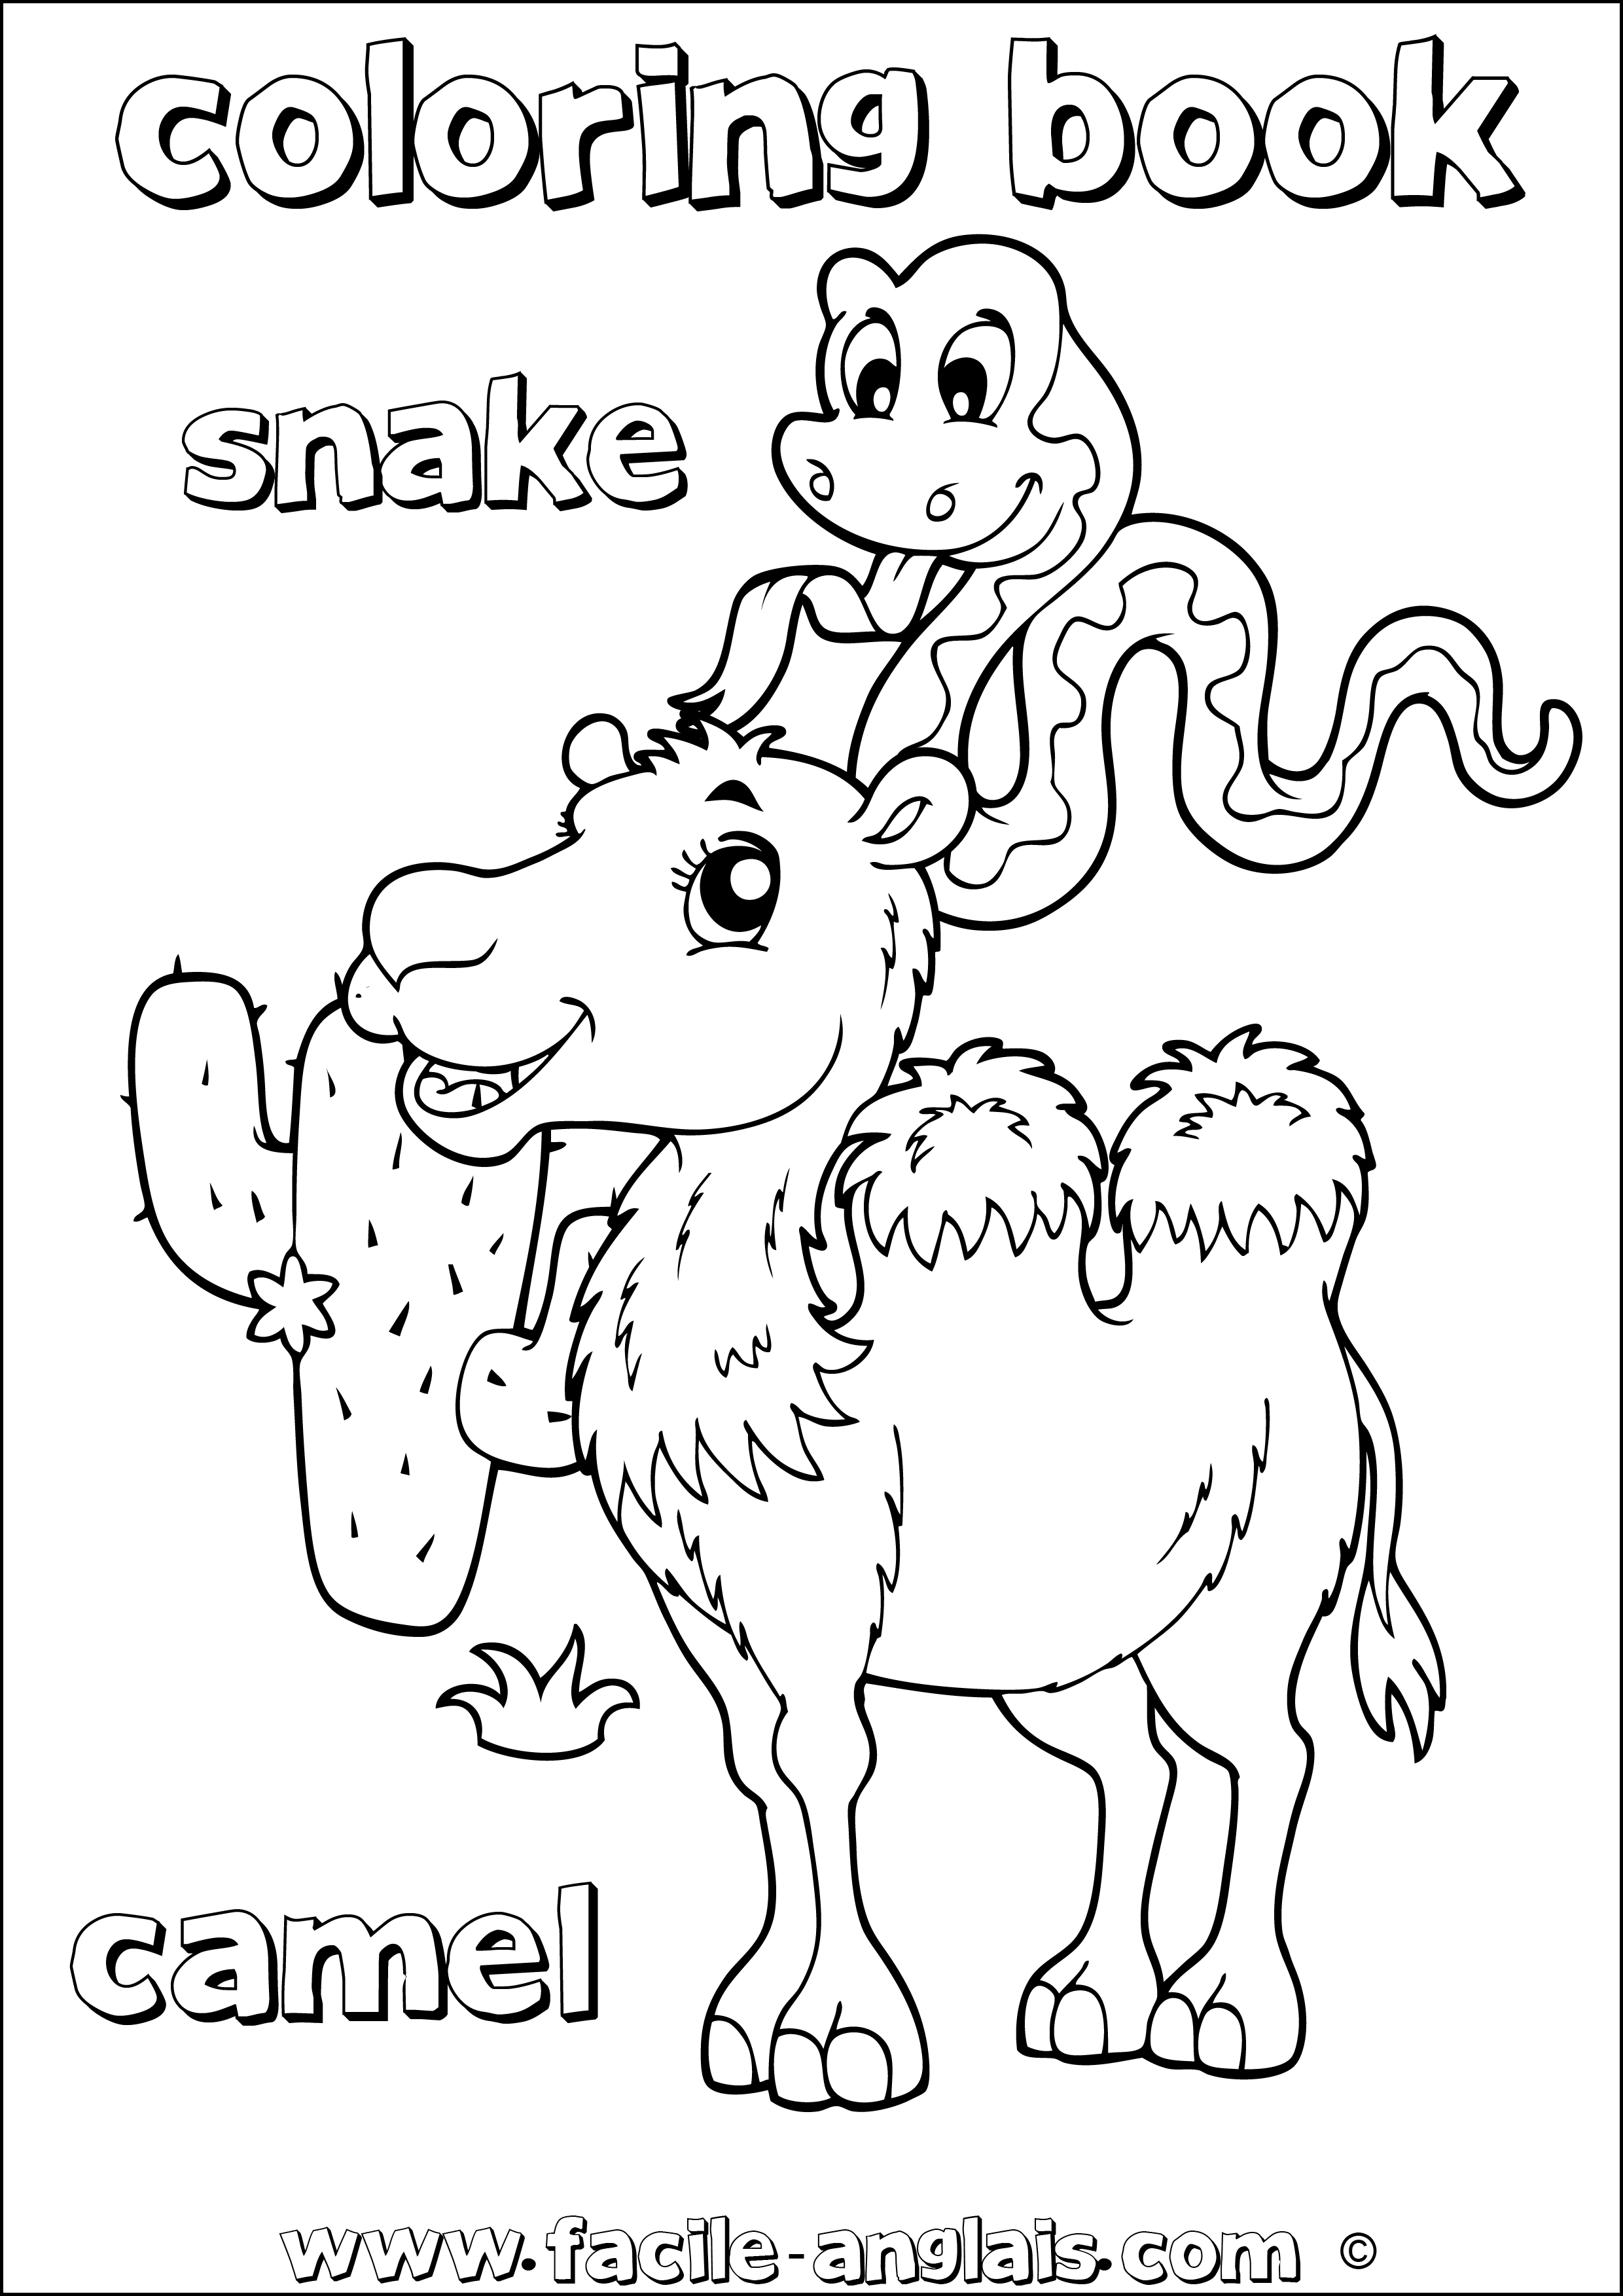 coloring book greater snake camel